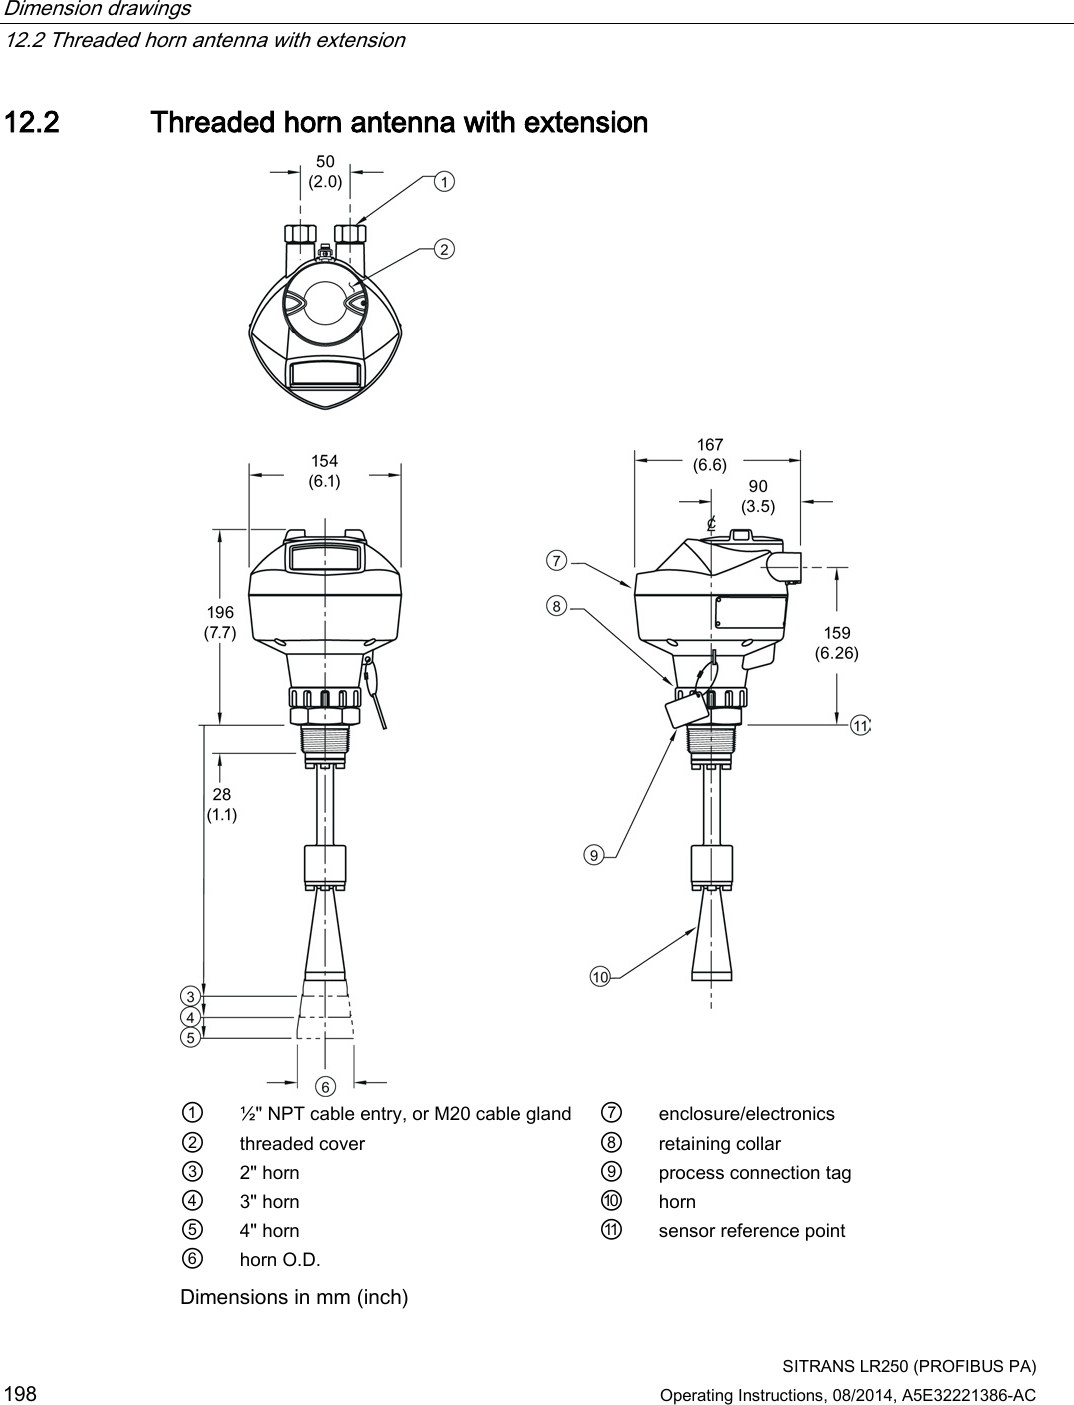 Dimension drawings   12.2 Threaded horn antenna with extension  SITRANS LR250 (PROFIBUS PA) 198 Operating Instructions, 08/2014, A5E32221386-AC 12.2 Threaded horn antenna with extension  ① ½&quot; NPT cable entry, or M20 cable gland ⑦ enclosure/electronics ② threaded cover ⑧ retaining collar ③ 2&quot; horn ⑨ process connection tag ④ 3&quot; horn ⑩ horn ⑤ 4&quot; horn ⑪ sensor reference point ⑥ horn O.D.   Dimensions in mm (inch) 